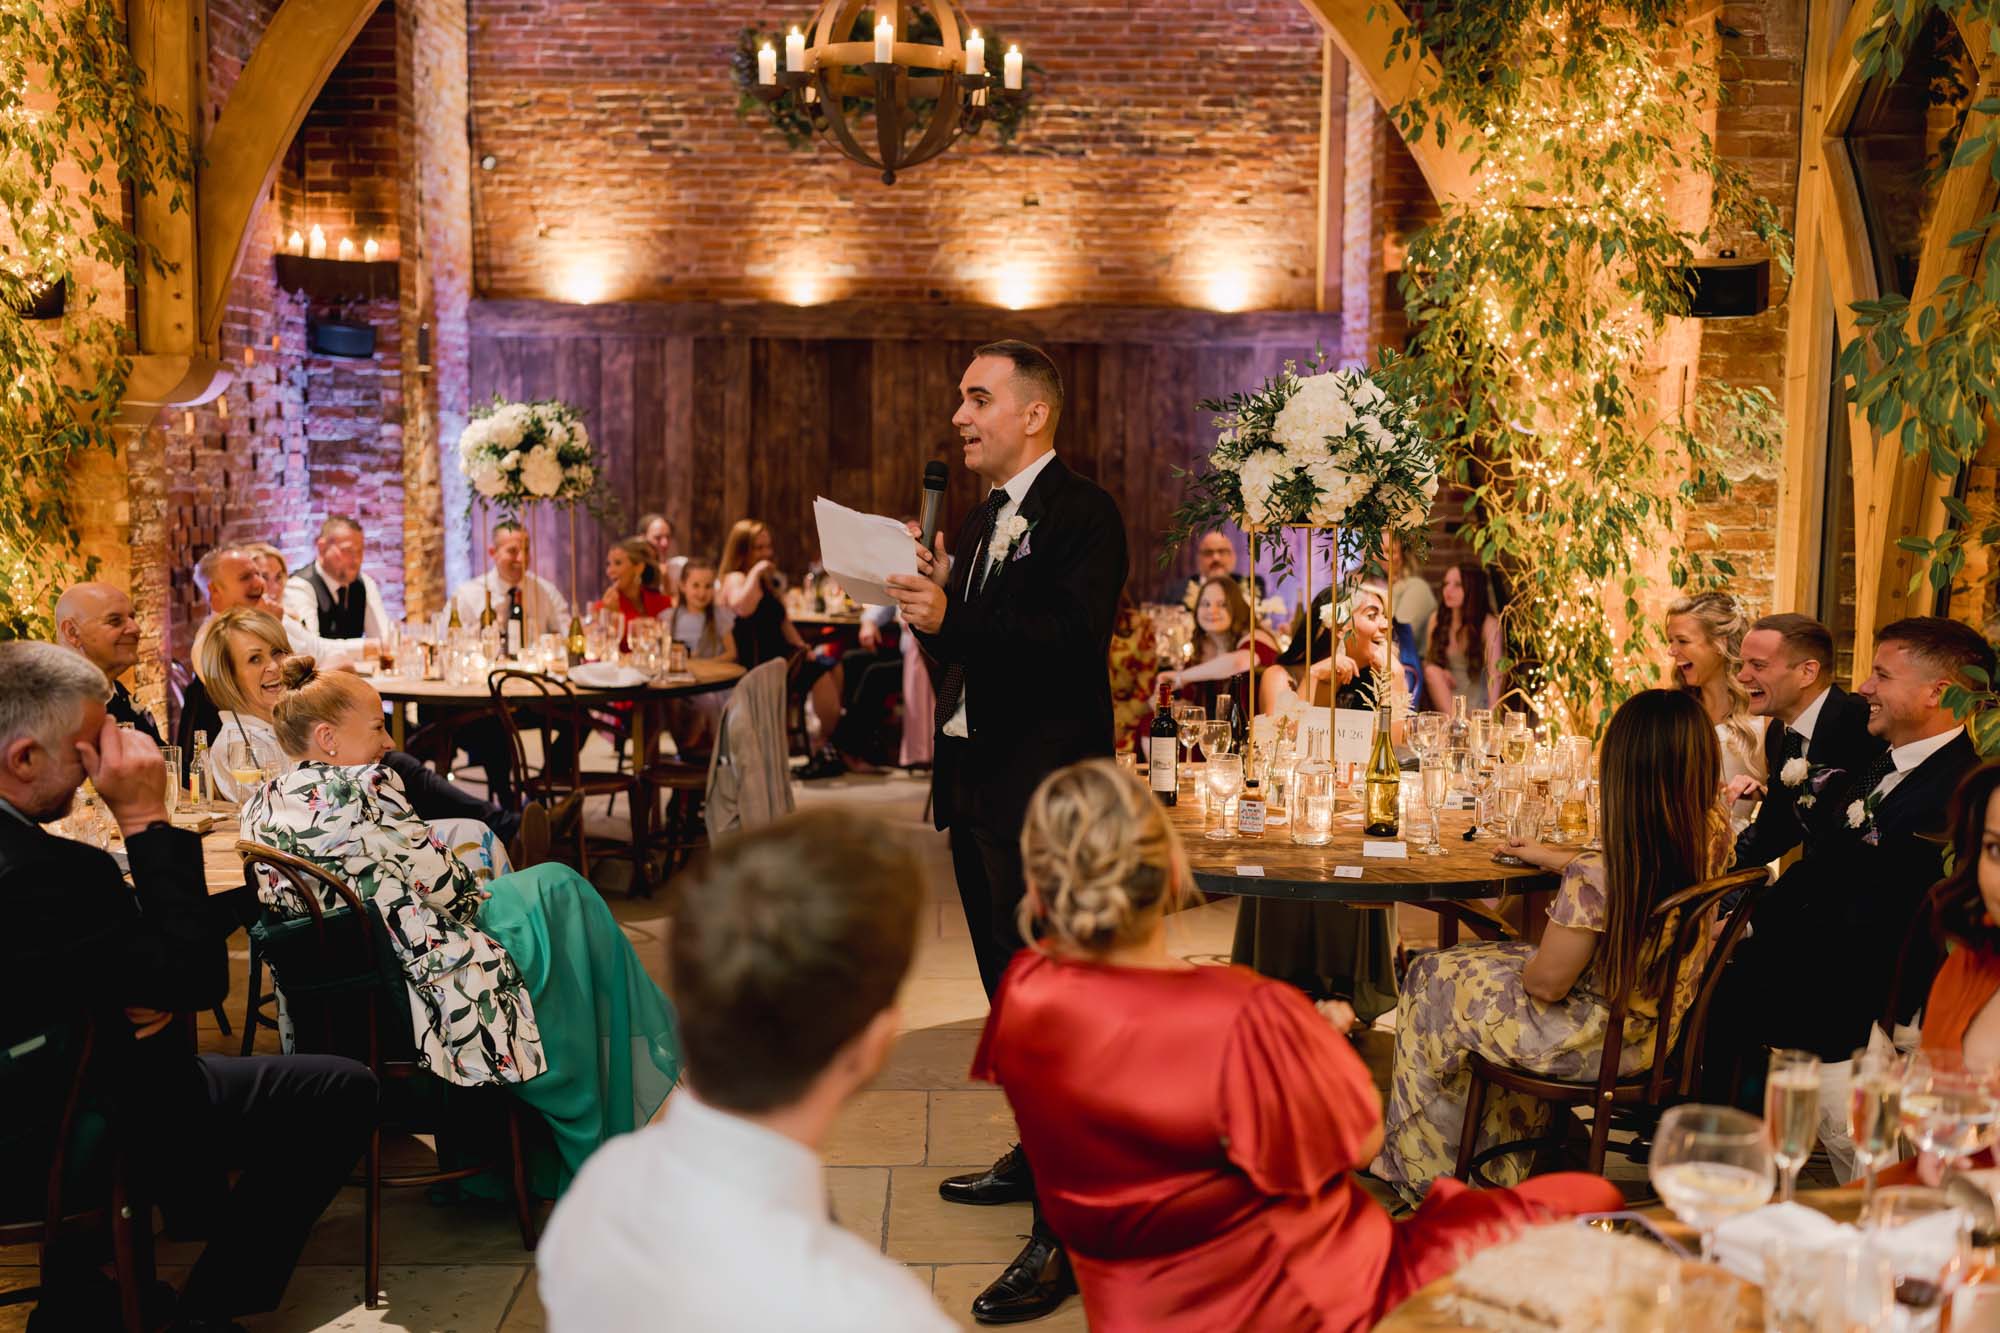 Best man delivers his speech at a wedding at Shustoke Barn.